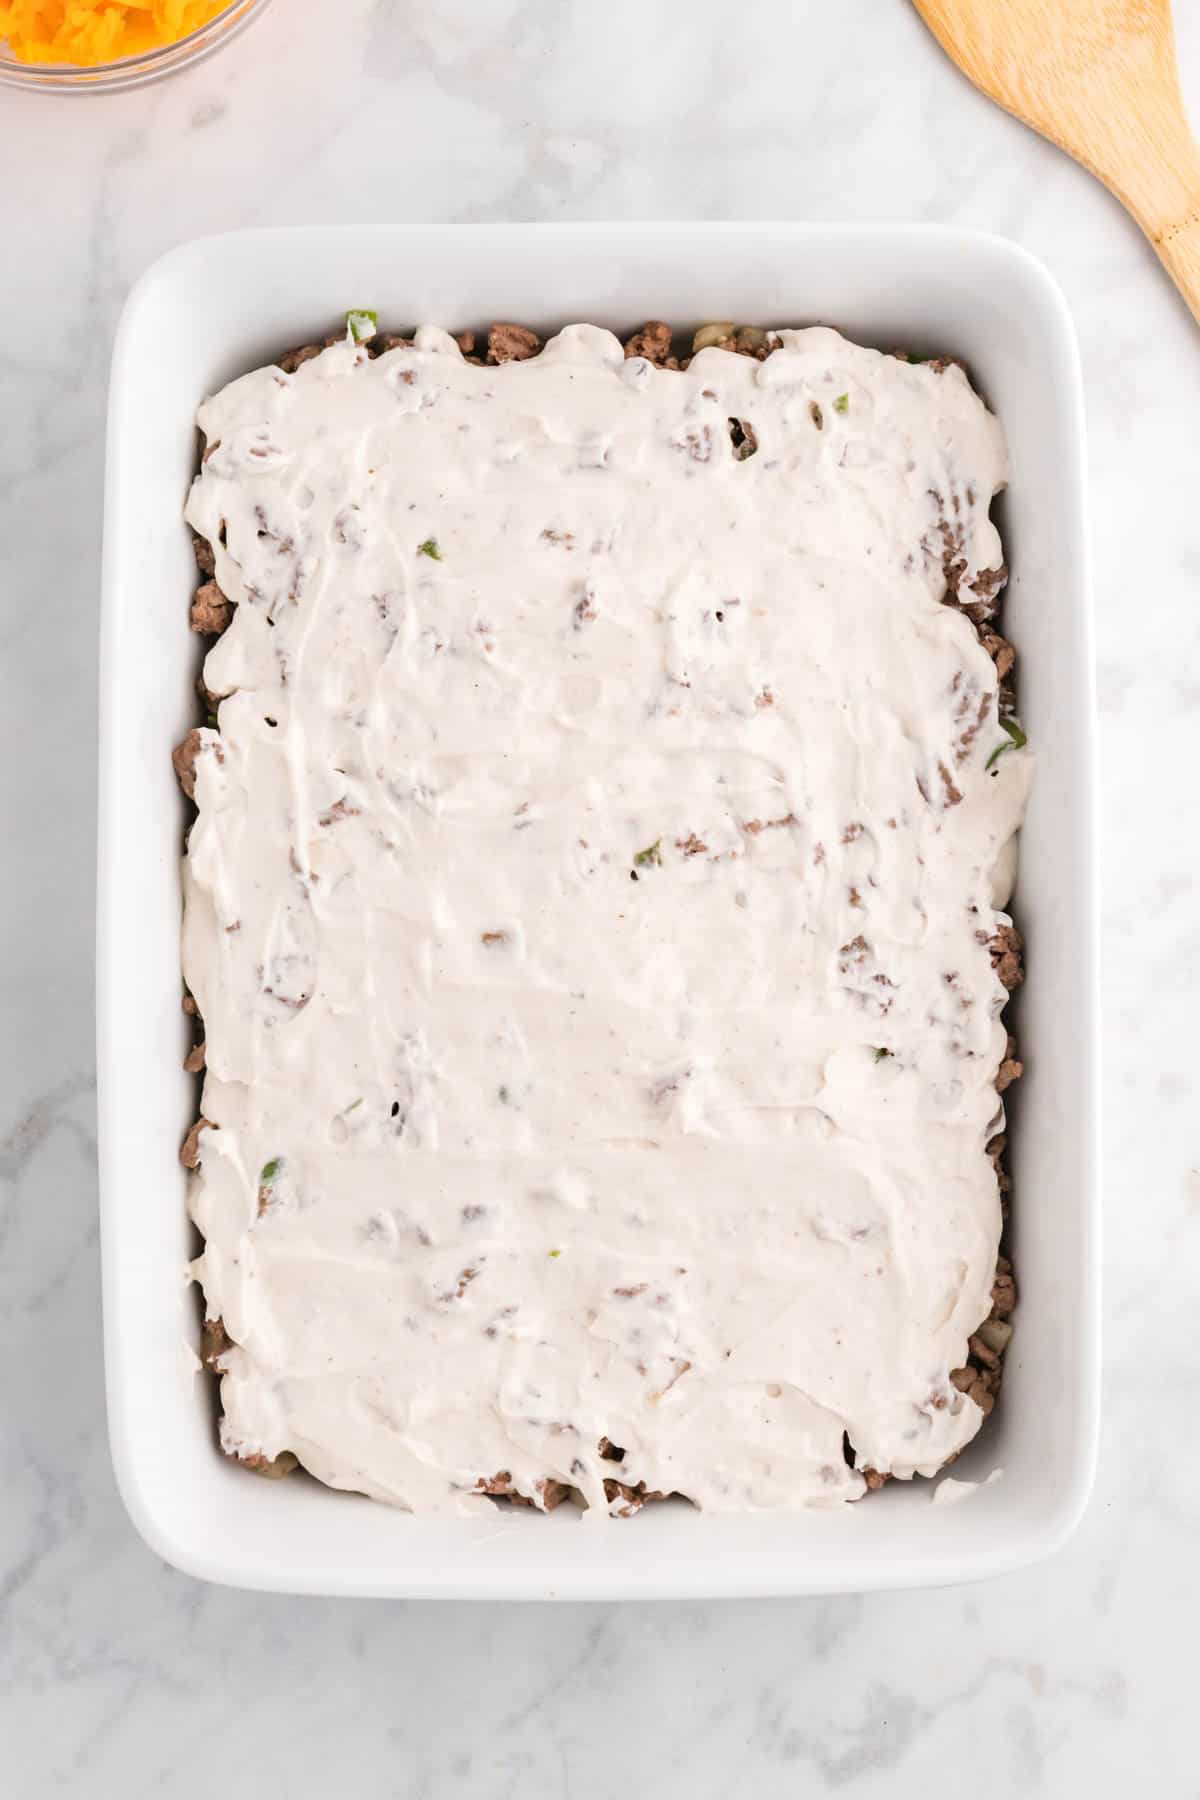 sour cream and cream of mushroom soup mixture spread over ground beef in a baking dish